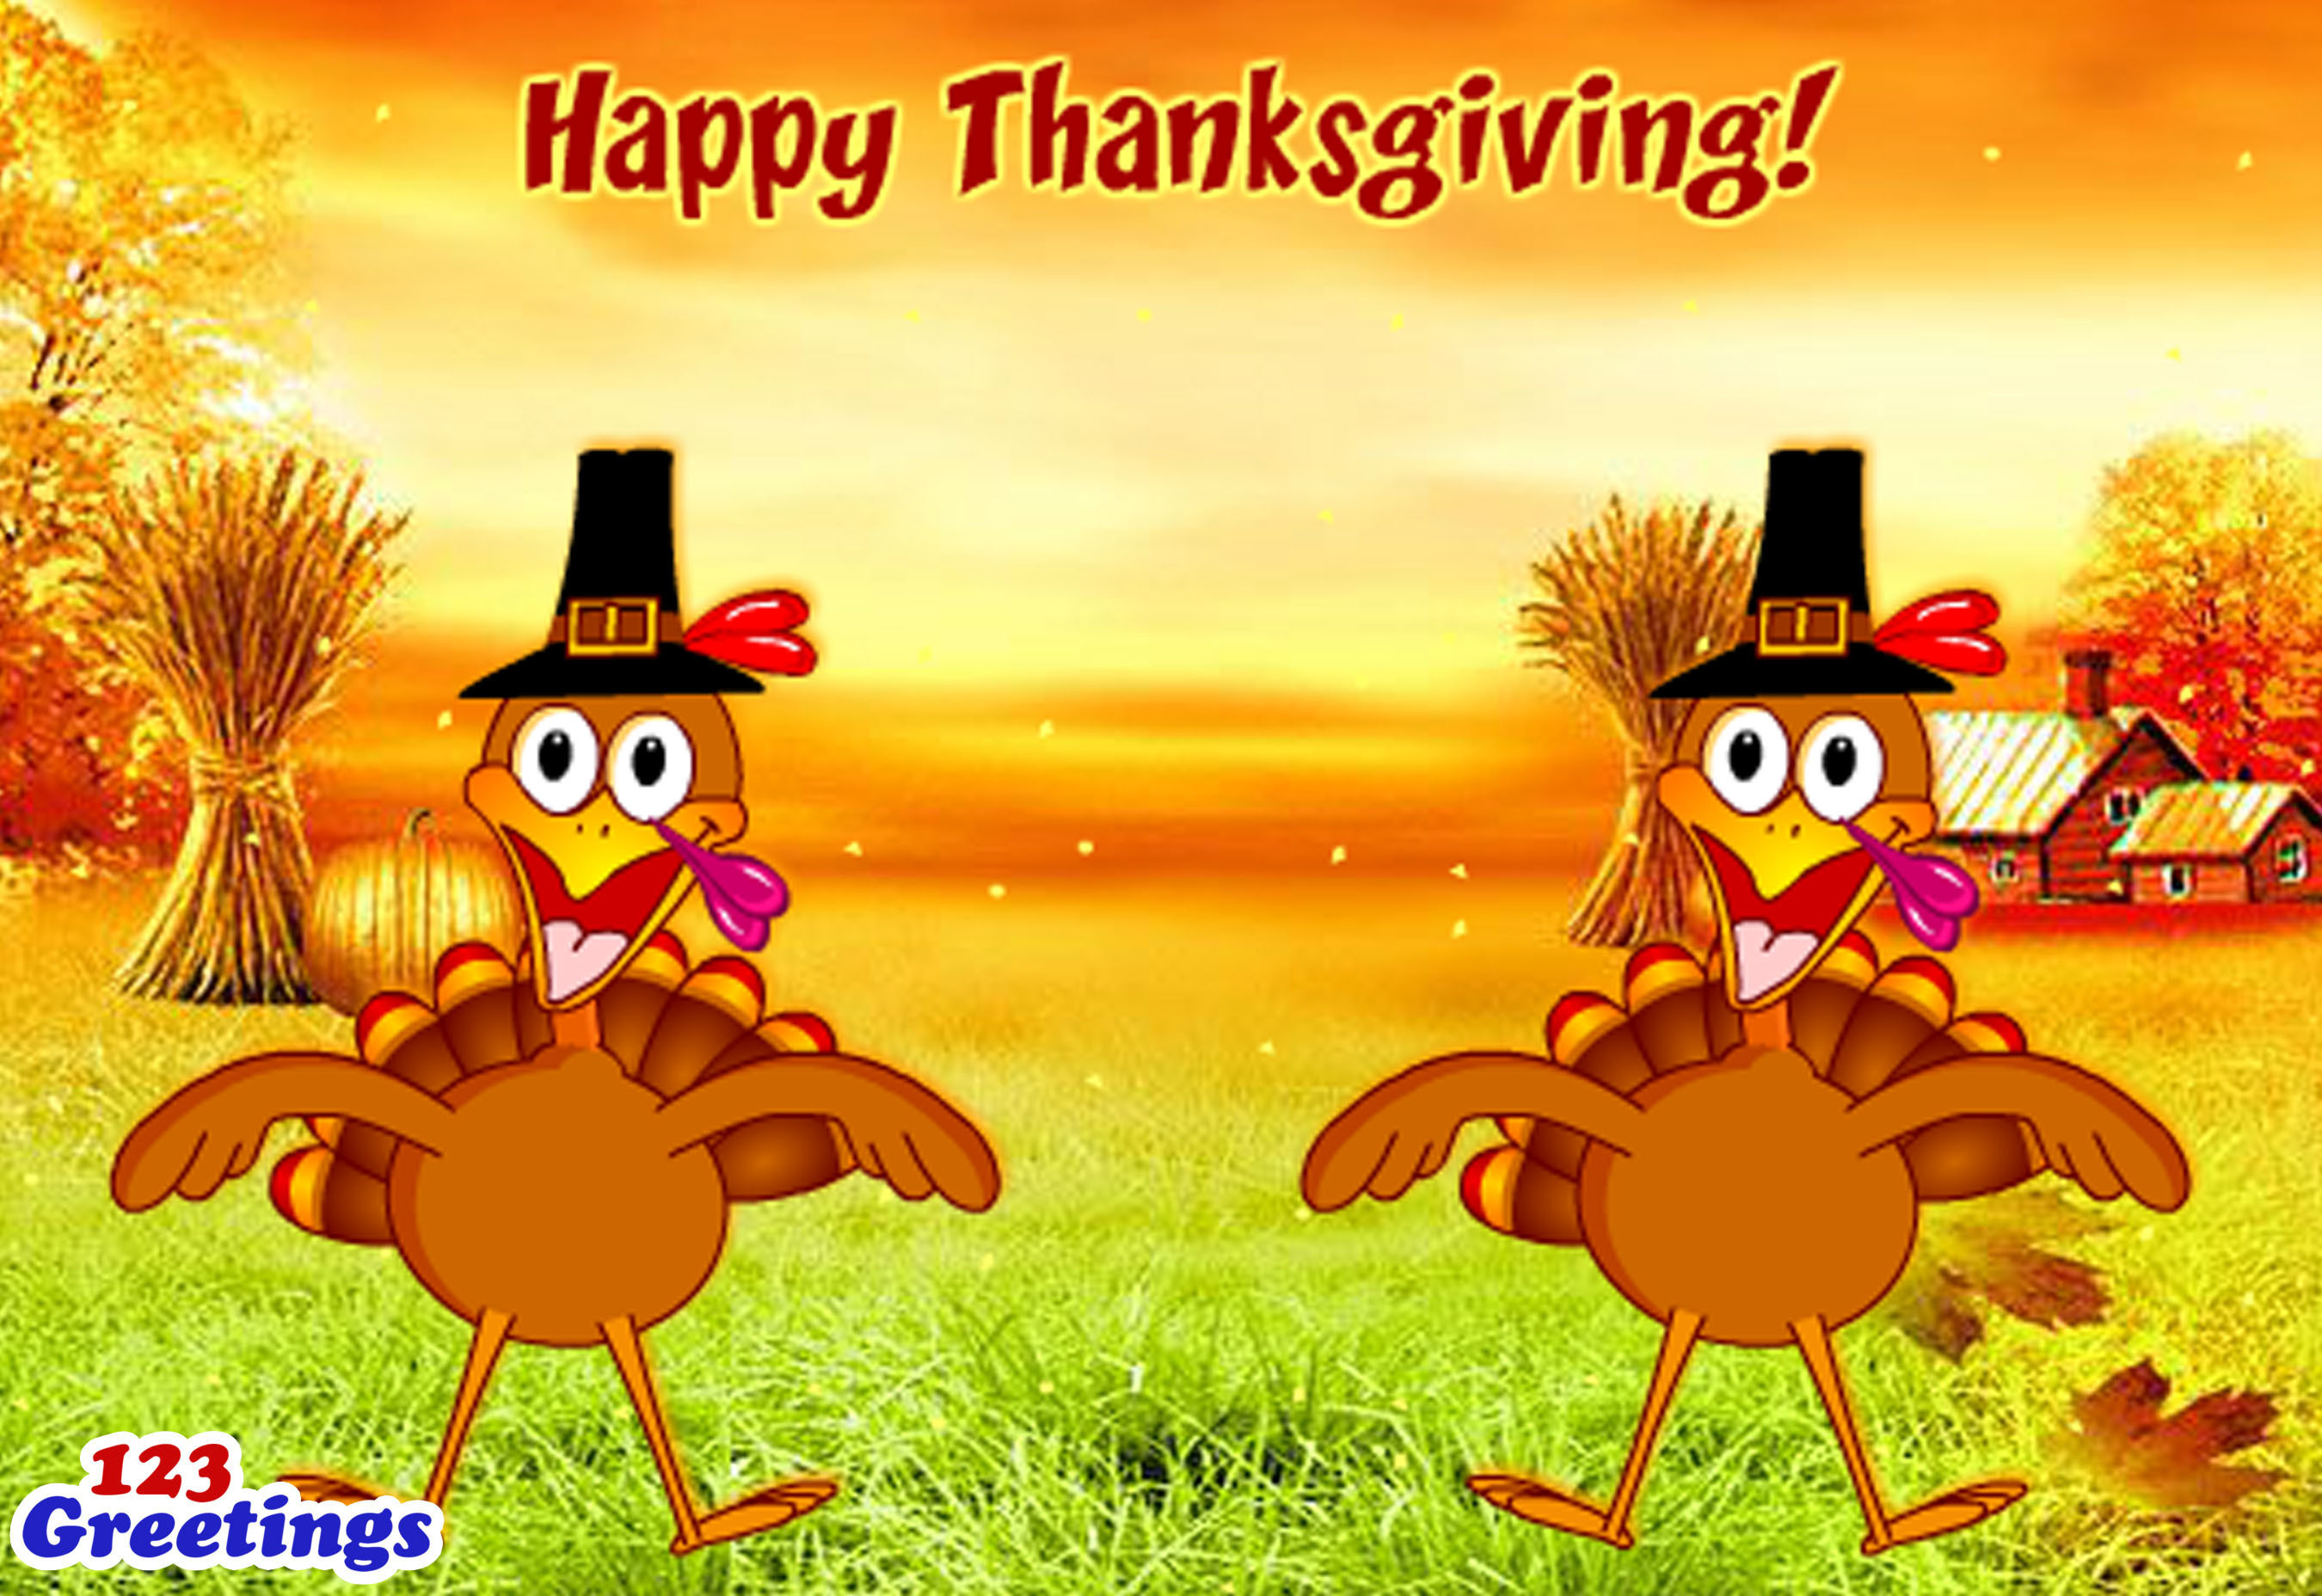 On Thanksgiving 2013, Enjoy Turkey Like Never Before- With Turkey Fun Ecards  From 